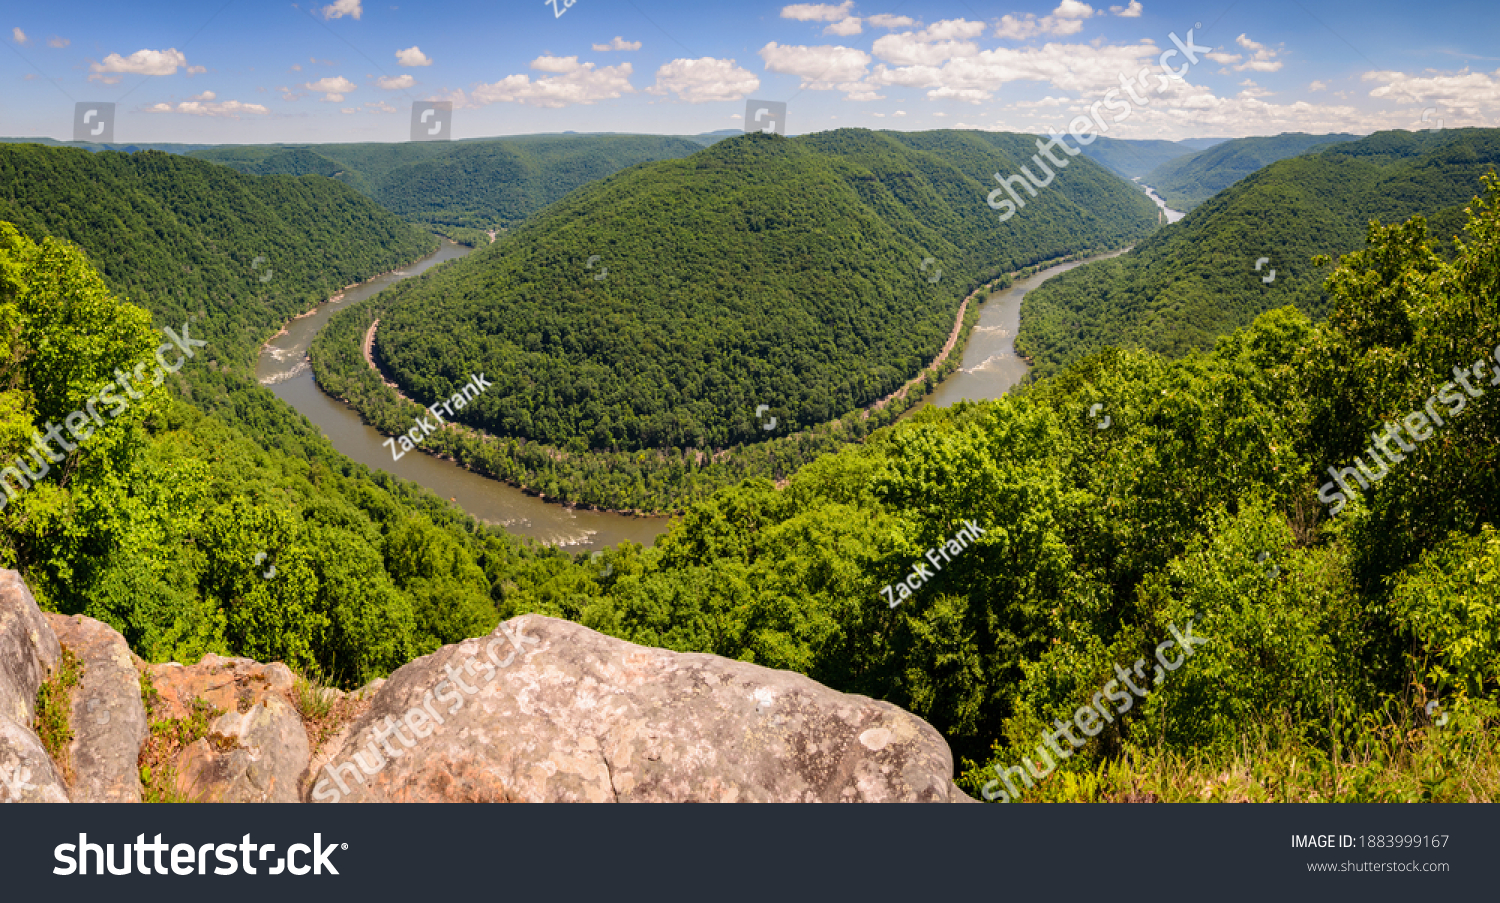 The New River at New River Gorge National Park and Preserve  #1883999167